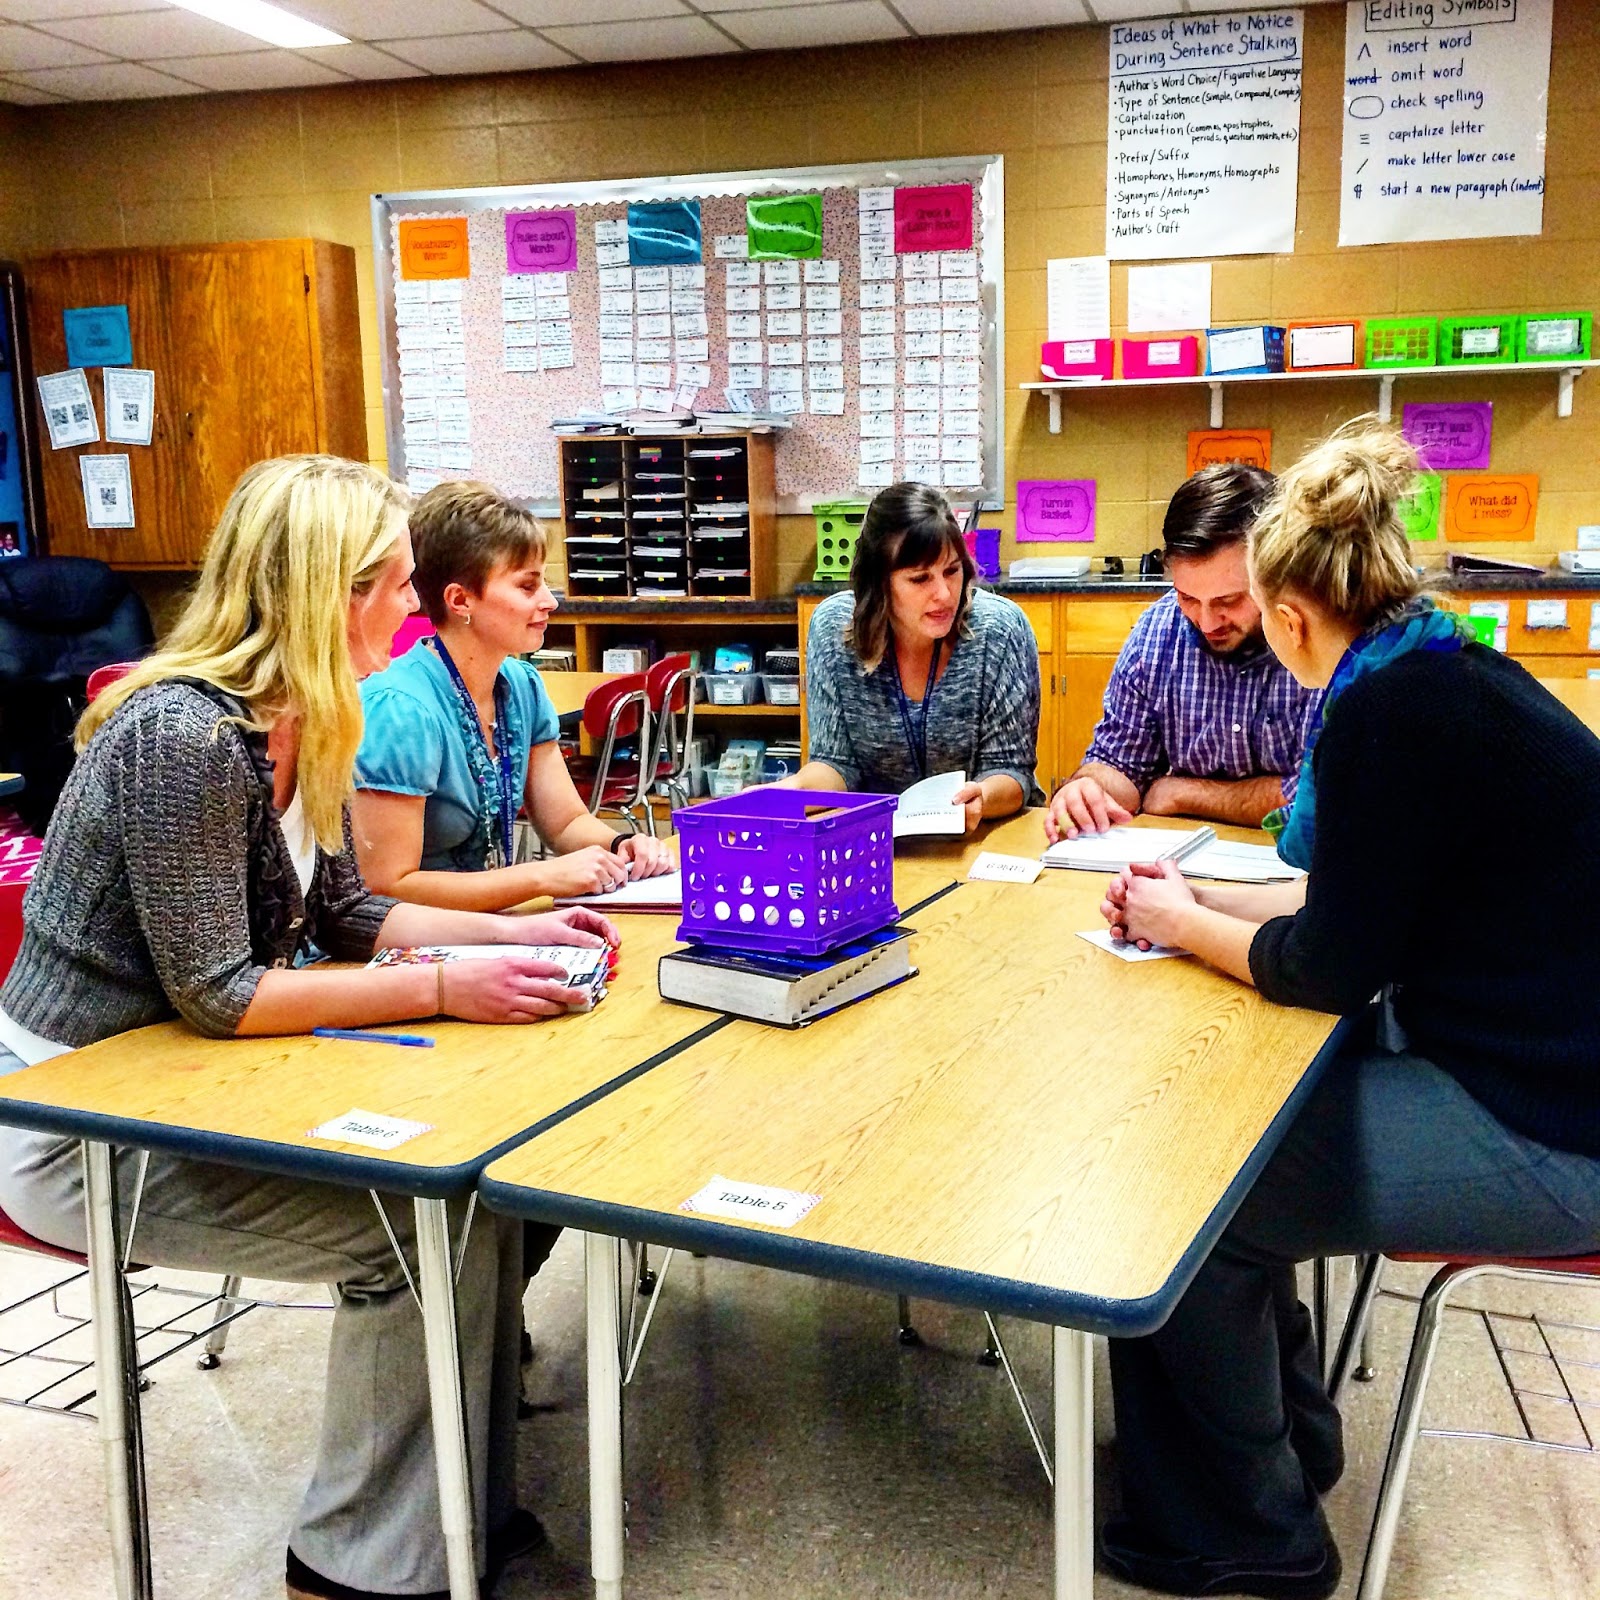 Middle School Teacher to Literacy Coach: Not Just Another Meeting